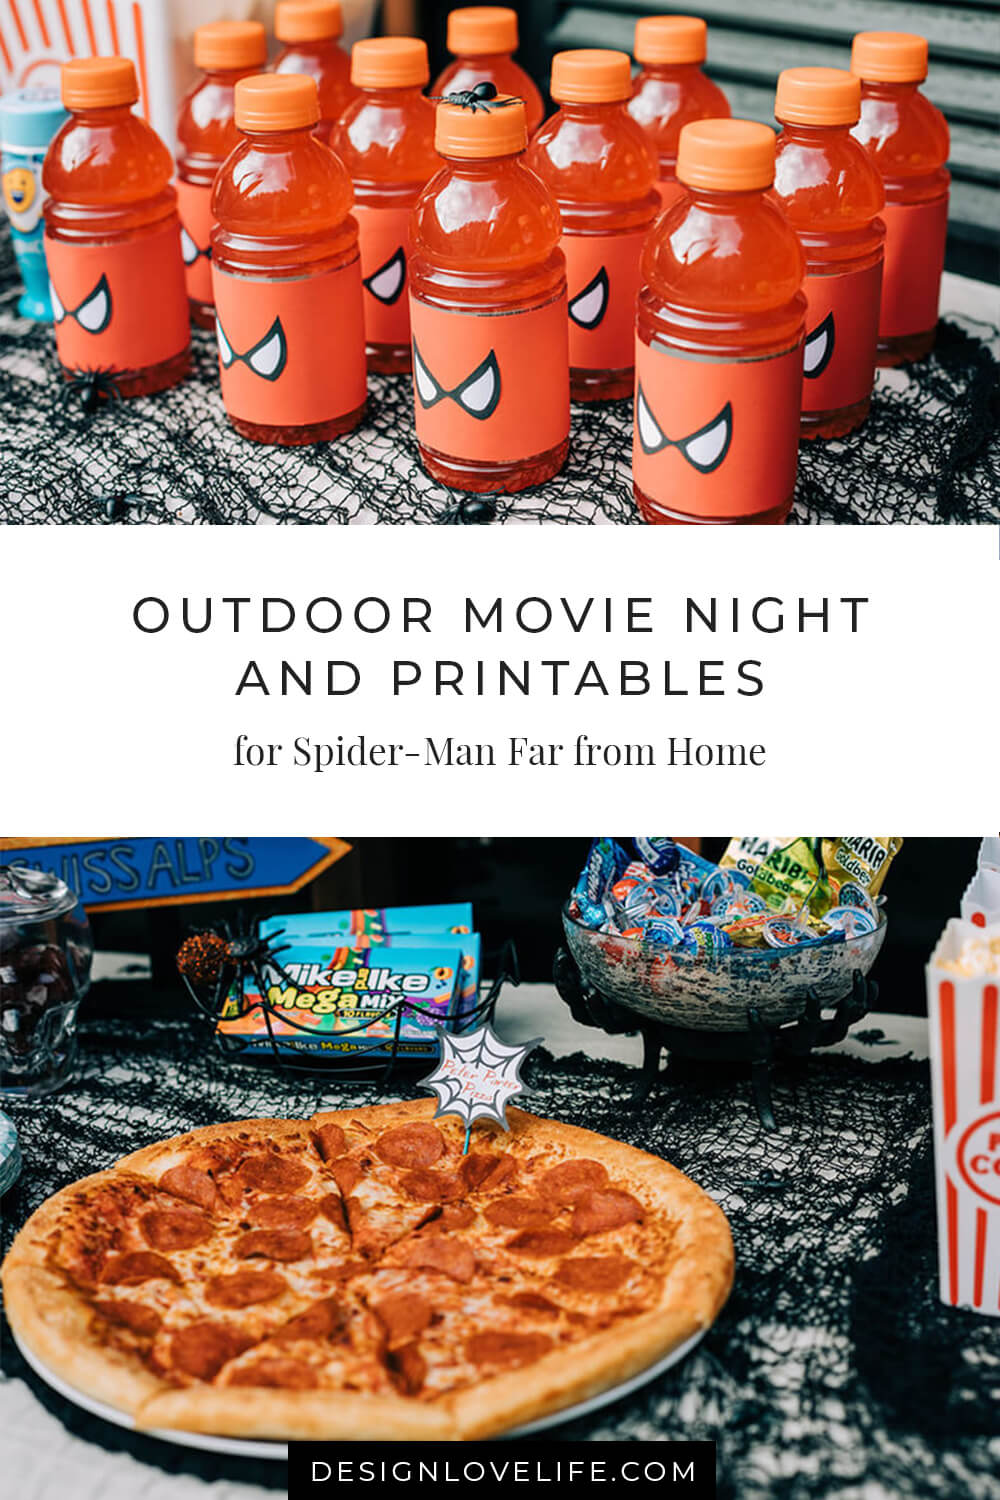 Outdoor Spider-Man: Far From Home Movie Night. Outdoor Movie Night with Printables for a Spider-Man themed party. Annie Johnson - Design Love Life